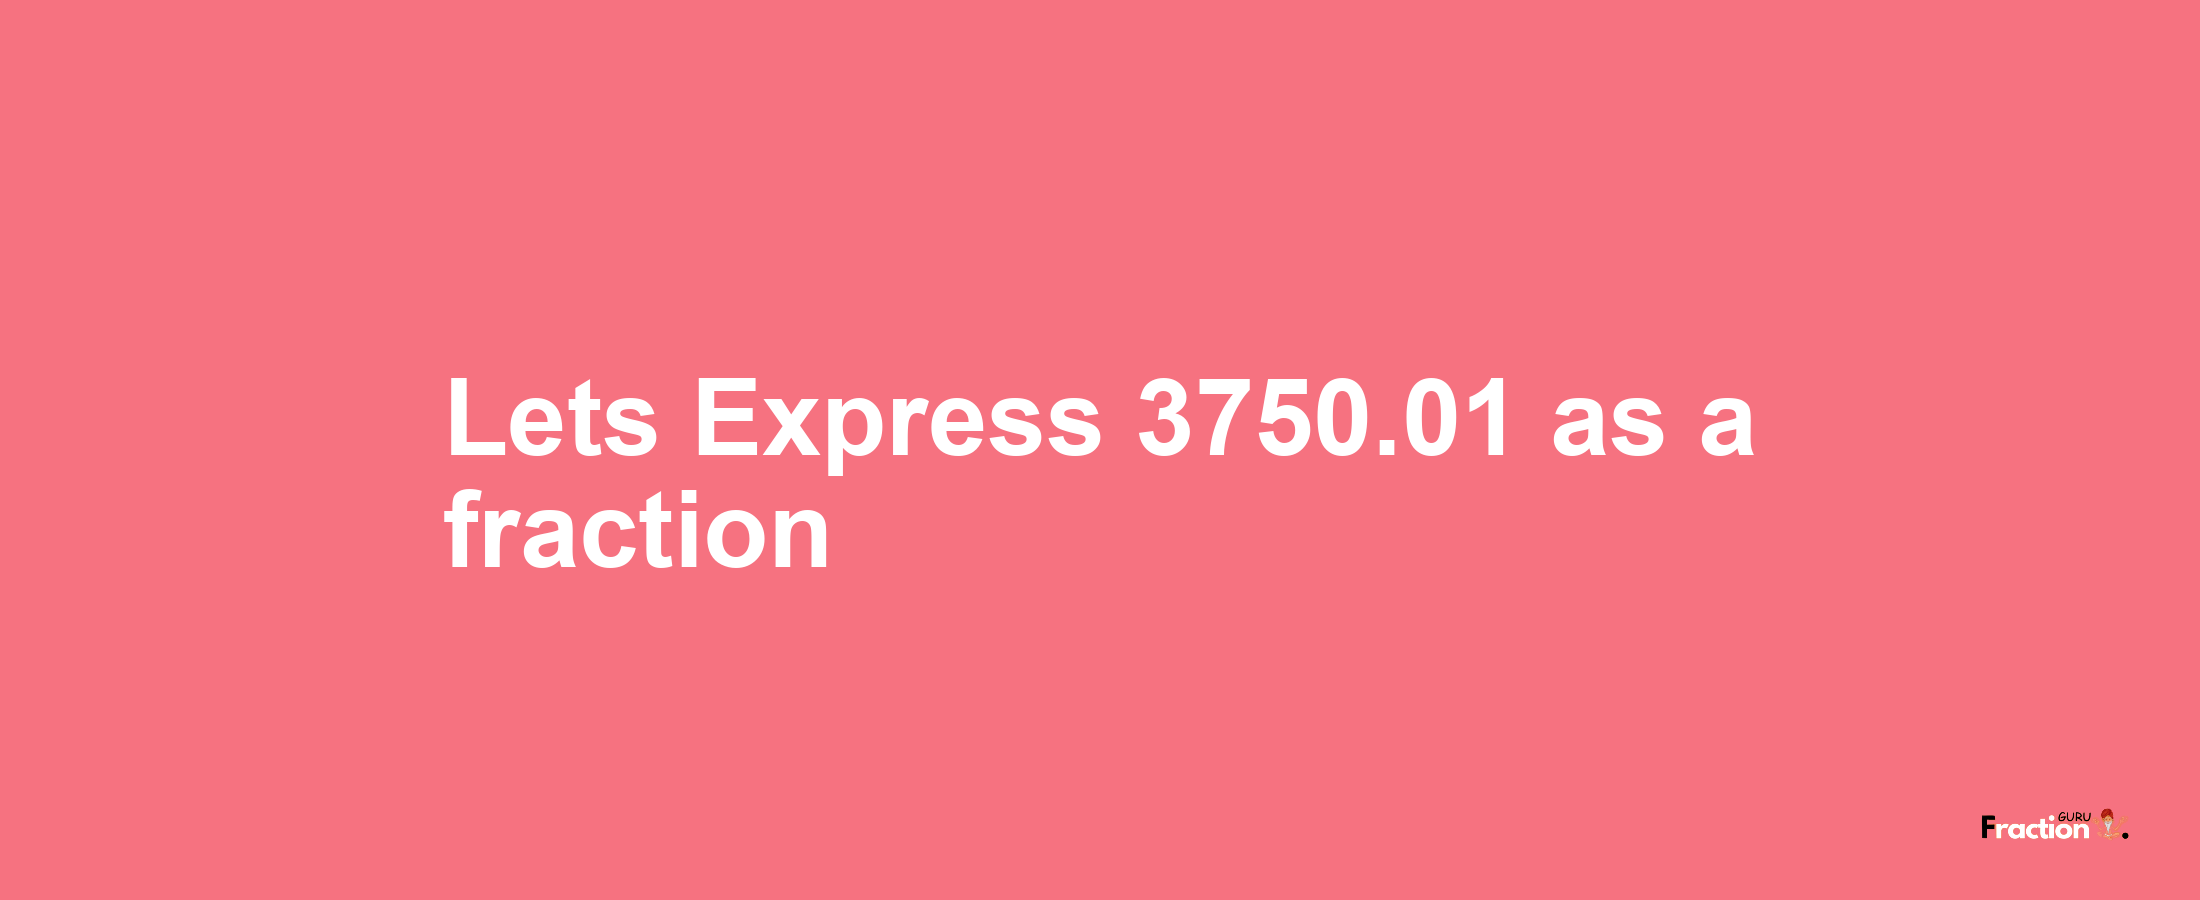 Lets Express 3750.01 as afraction